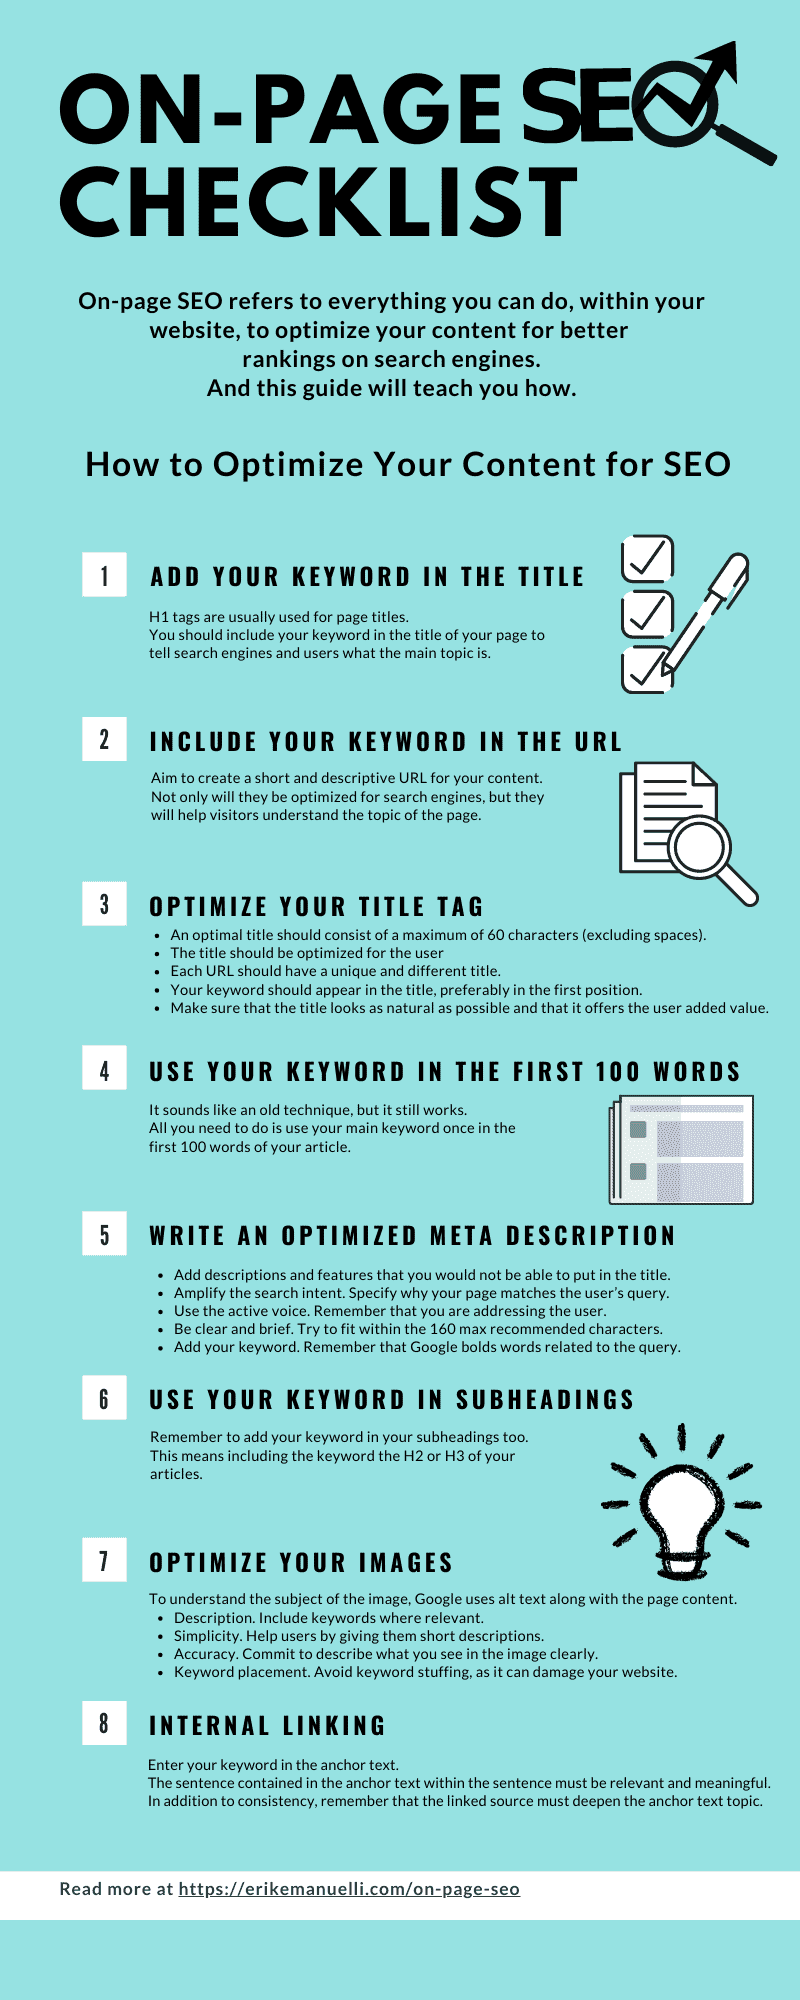 On page SEO checklist infographic by ErikEmanuelli.com